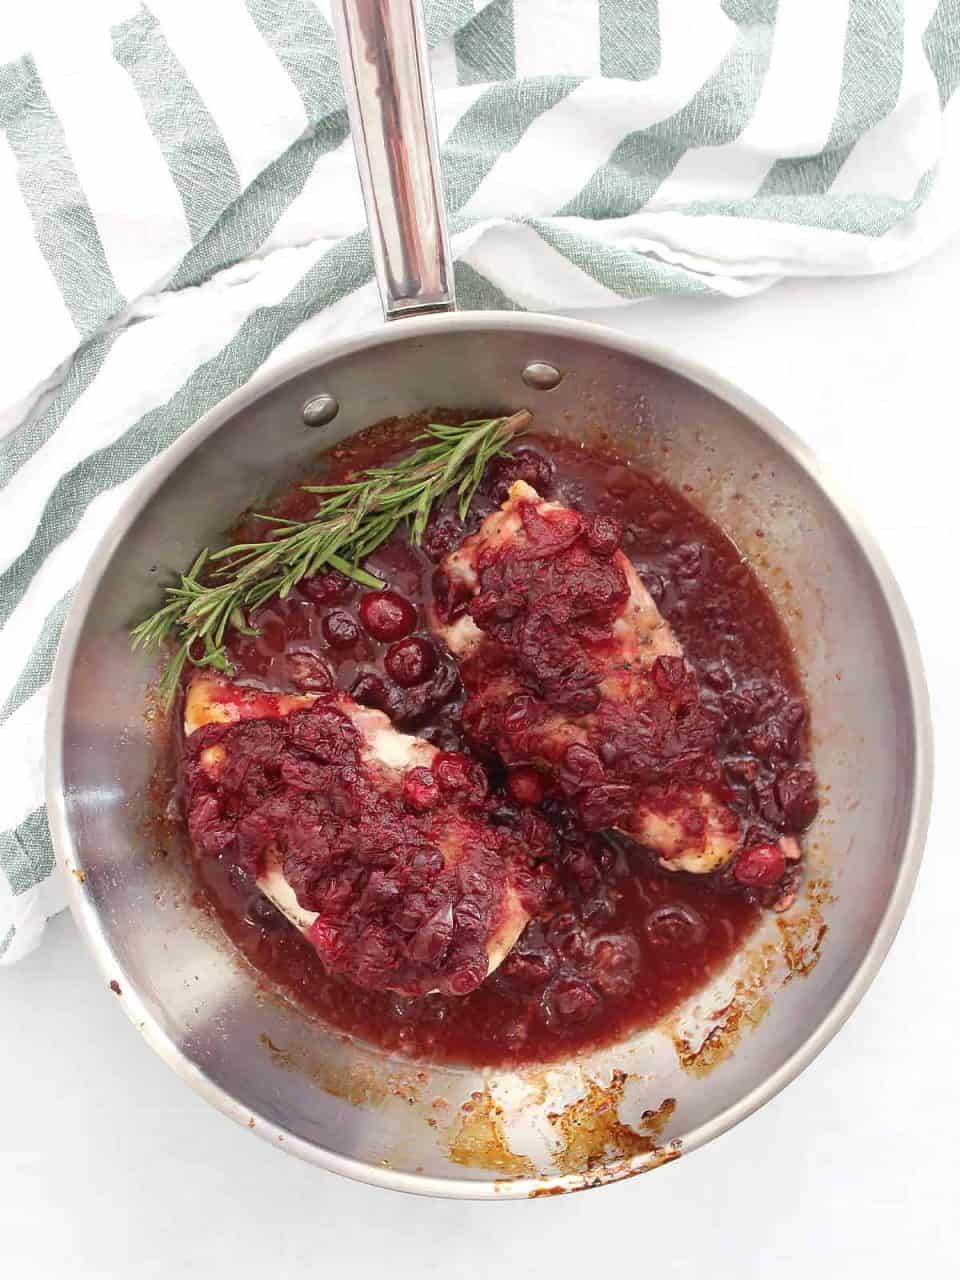 Two cranberry covered chicken breasts in a skillet with sauce and fresh rosemary.